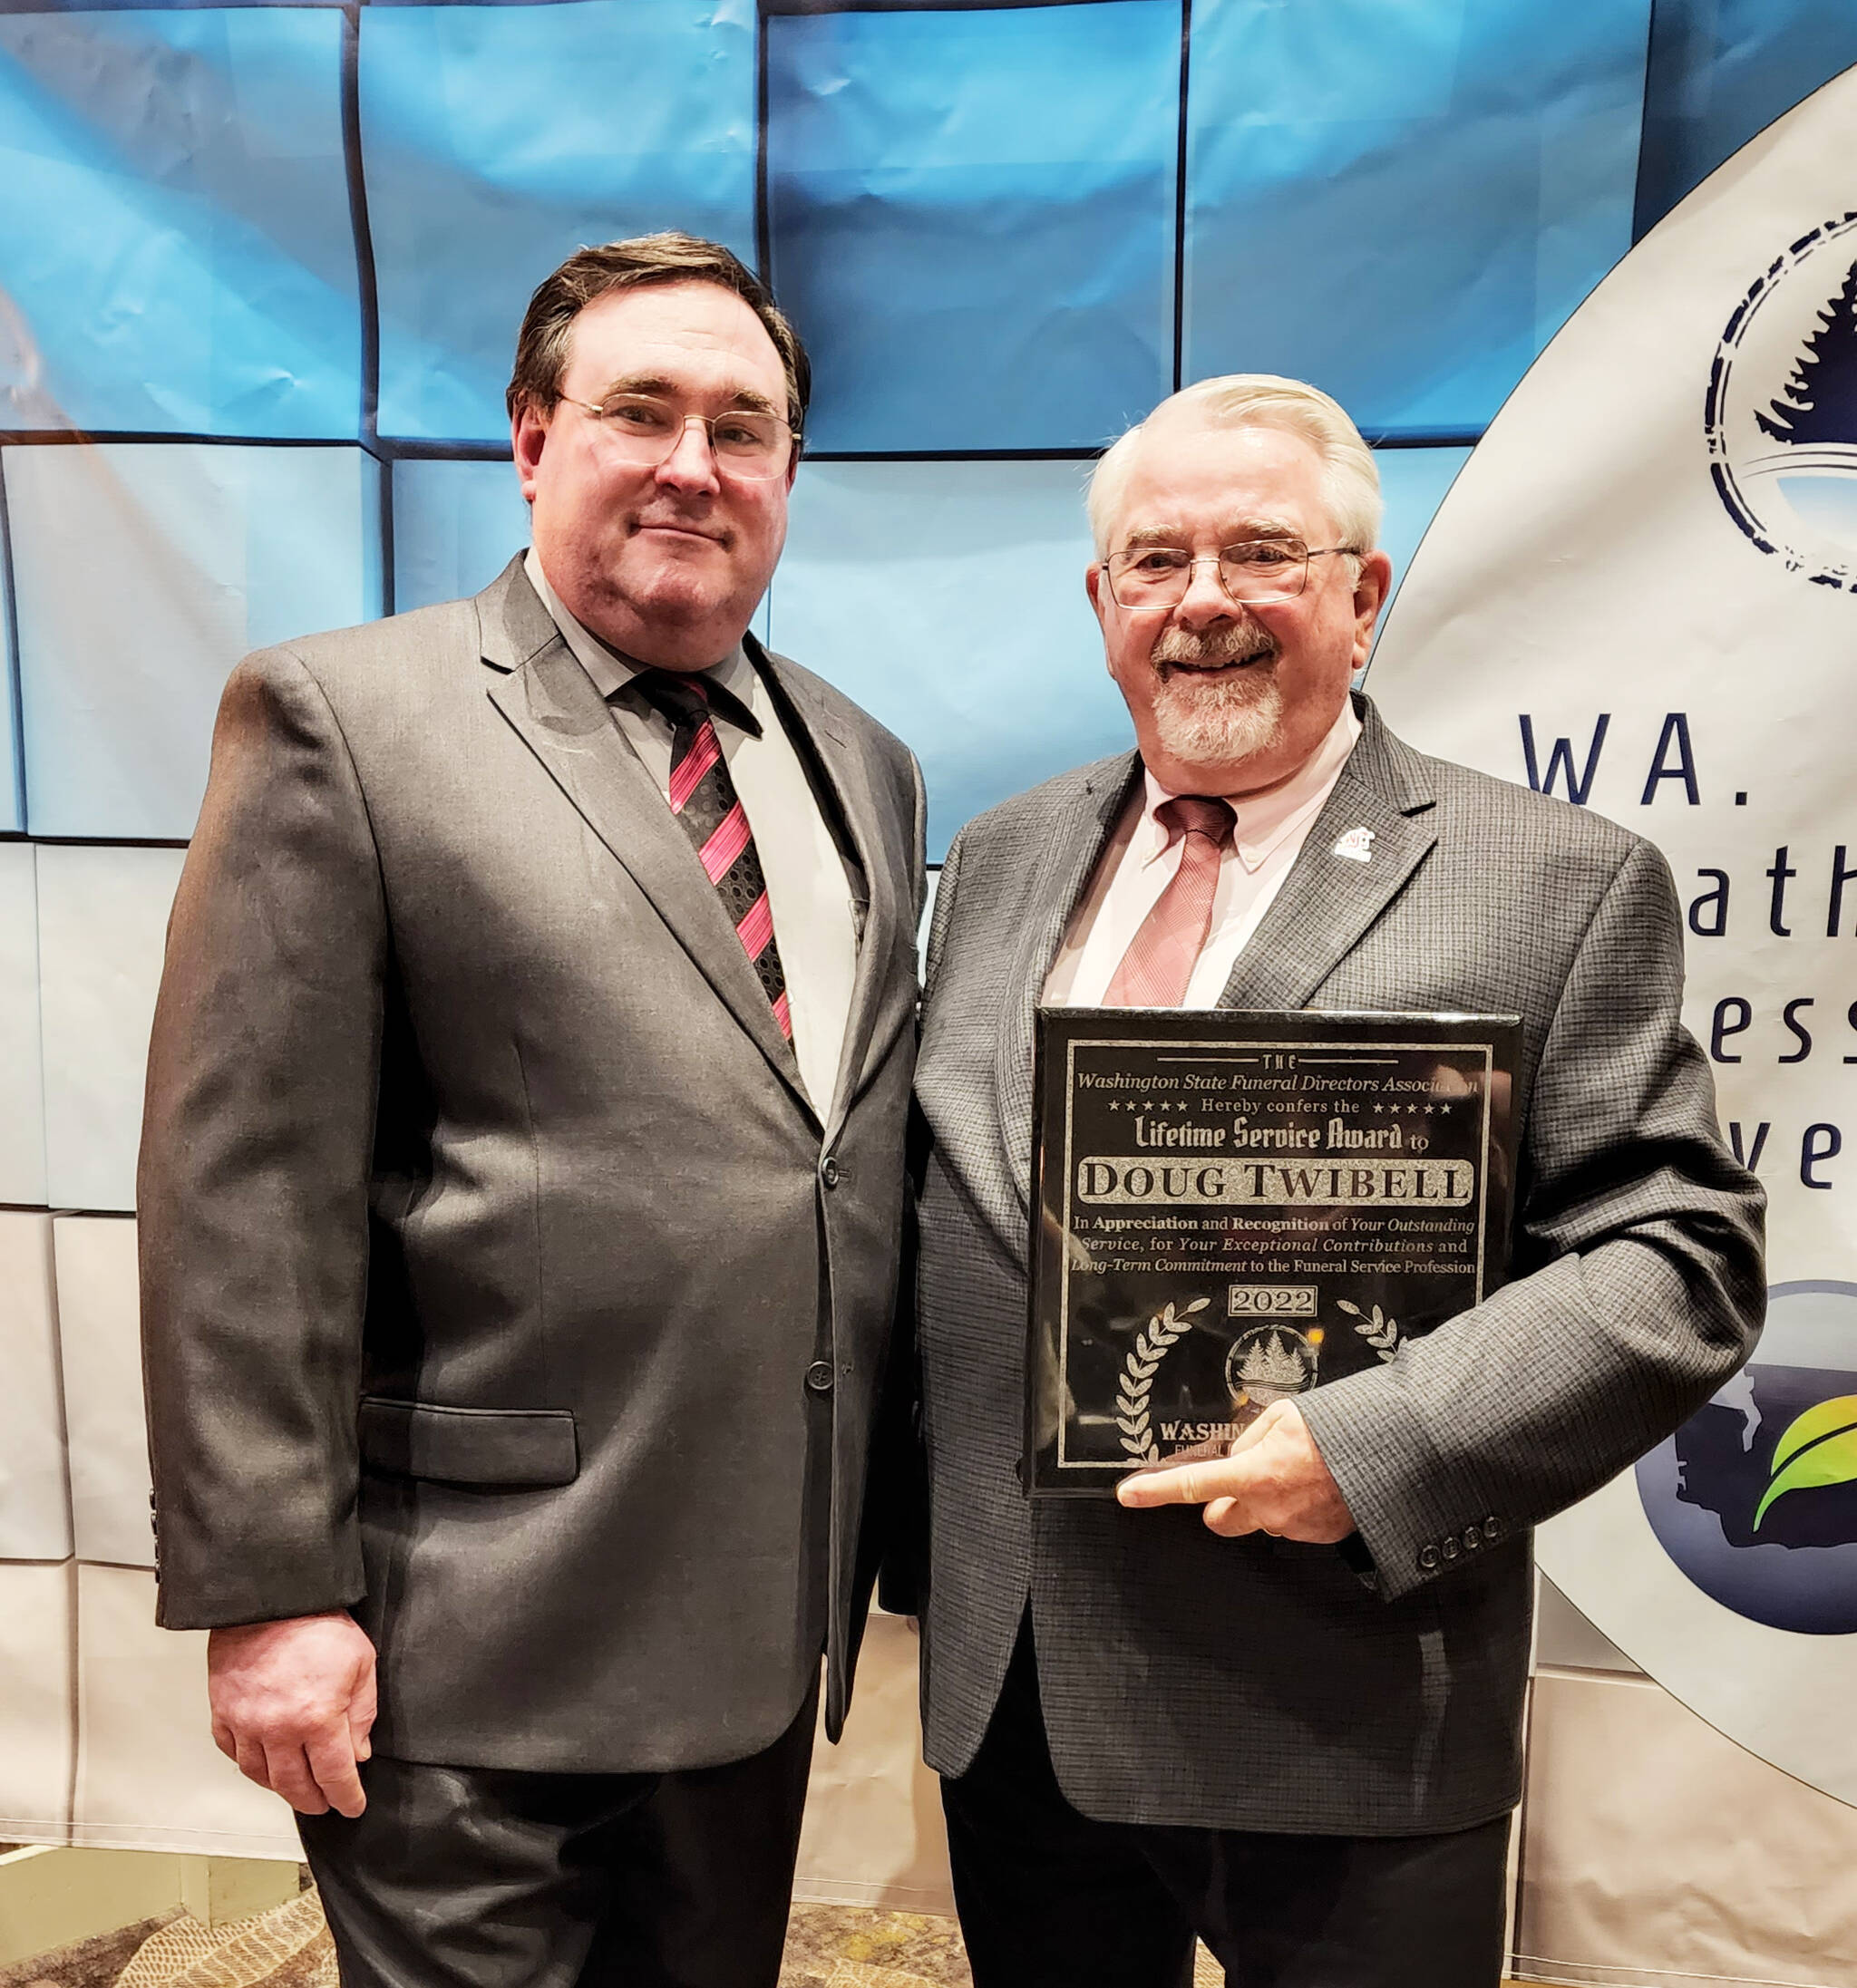 Doug Twibell, right, former owner of Twibell's Fern Hill Funeral Home in Aberdeen, recently received the Washington State Funeral Directors Association Lifetime Service Award. Son Keith, left, and his wife Heather, are the current owners of the funeral home. Courtesy photo